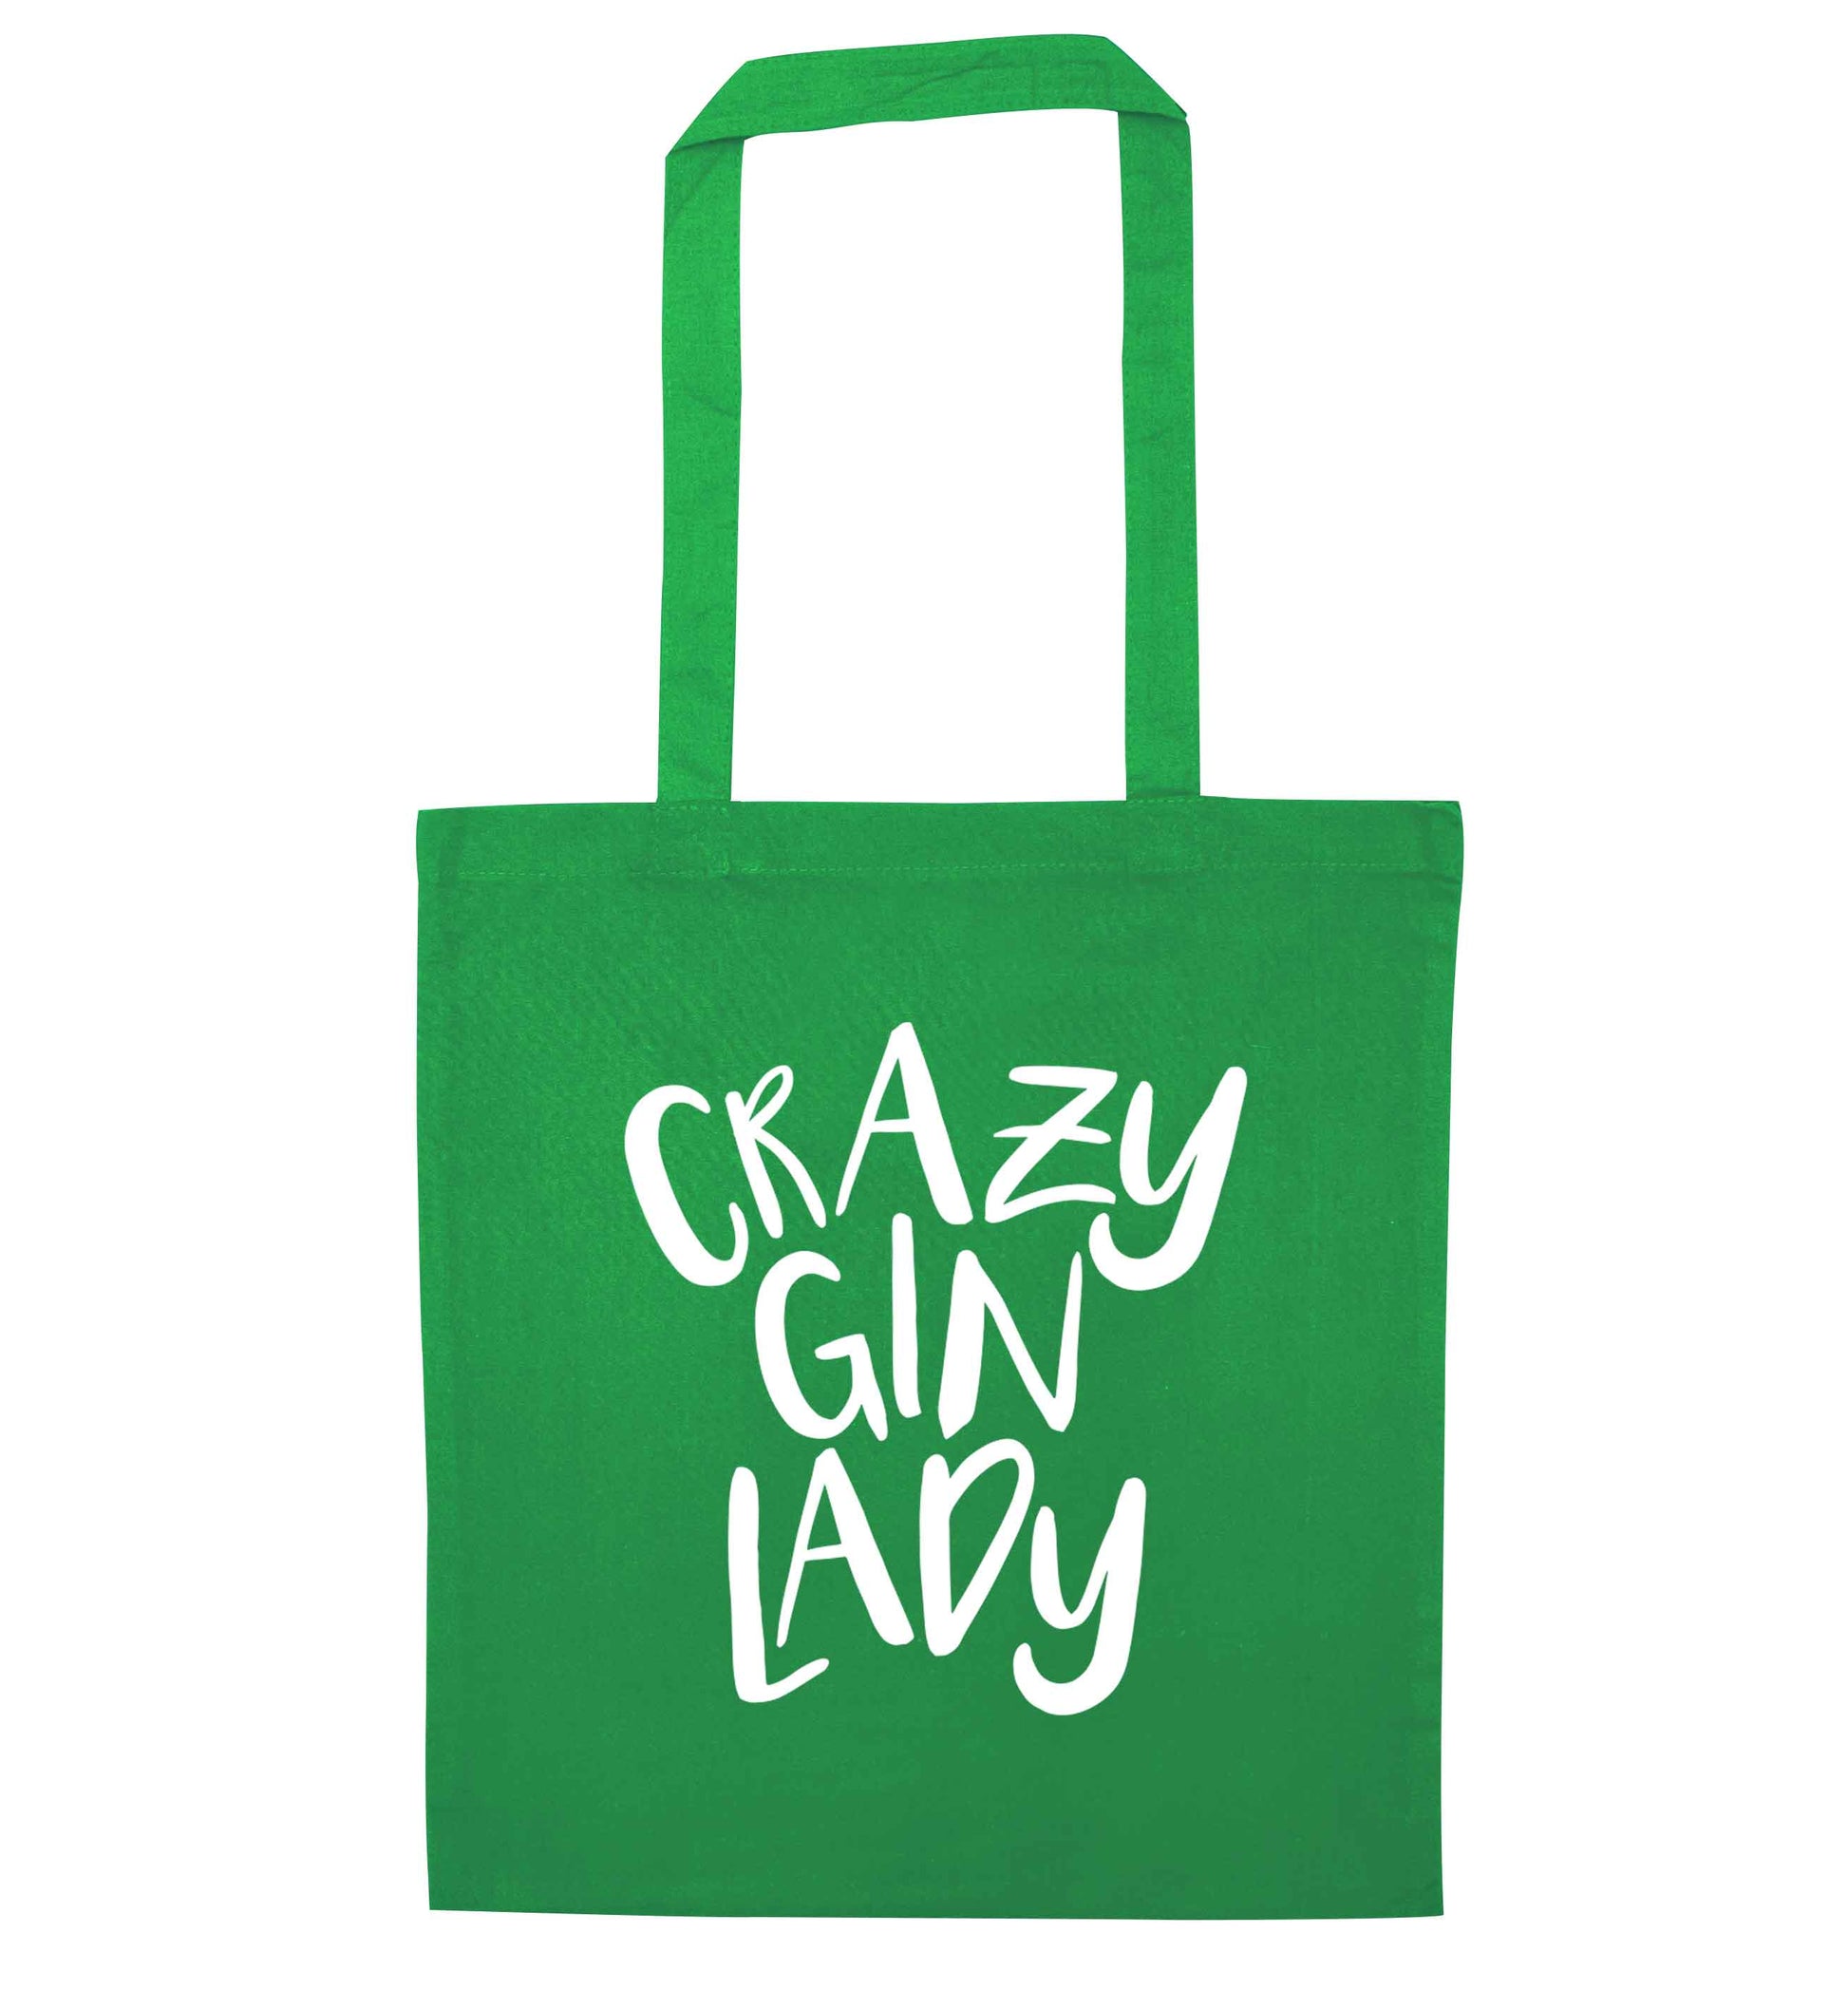 Crazy gin lady green tote bag